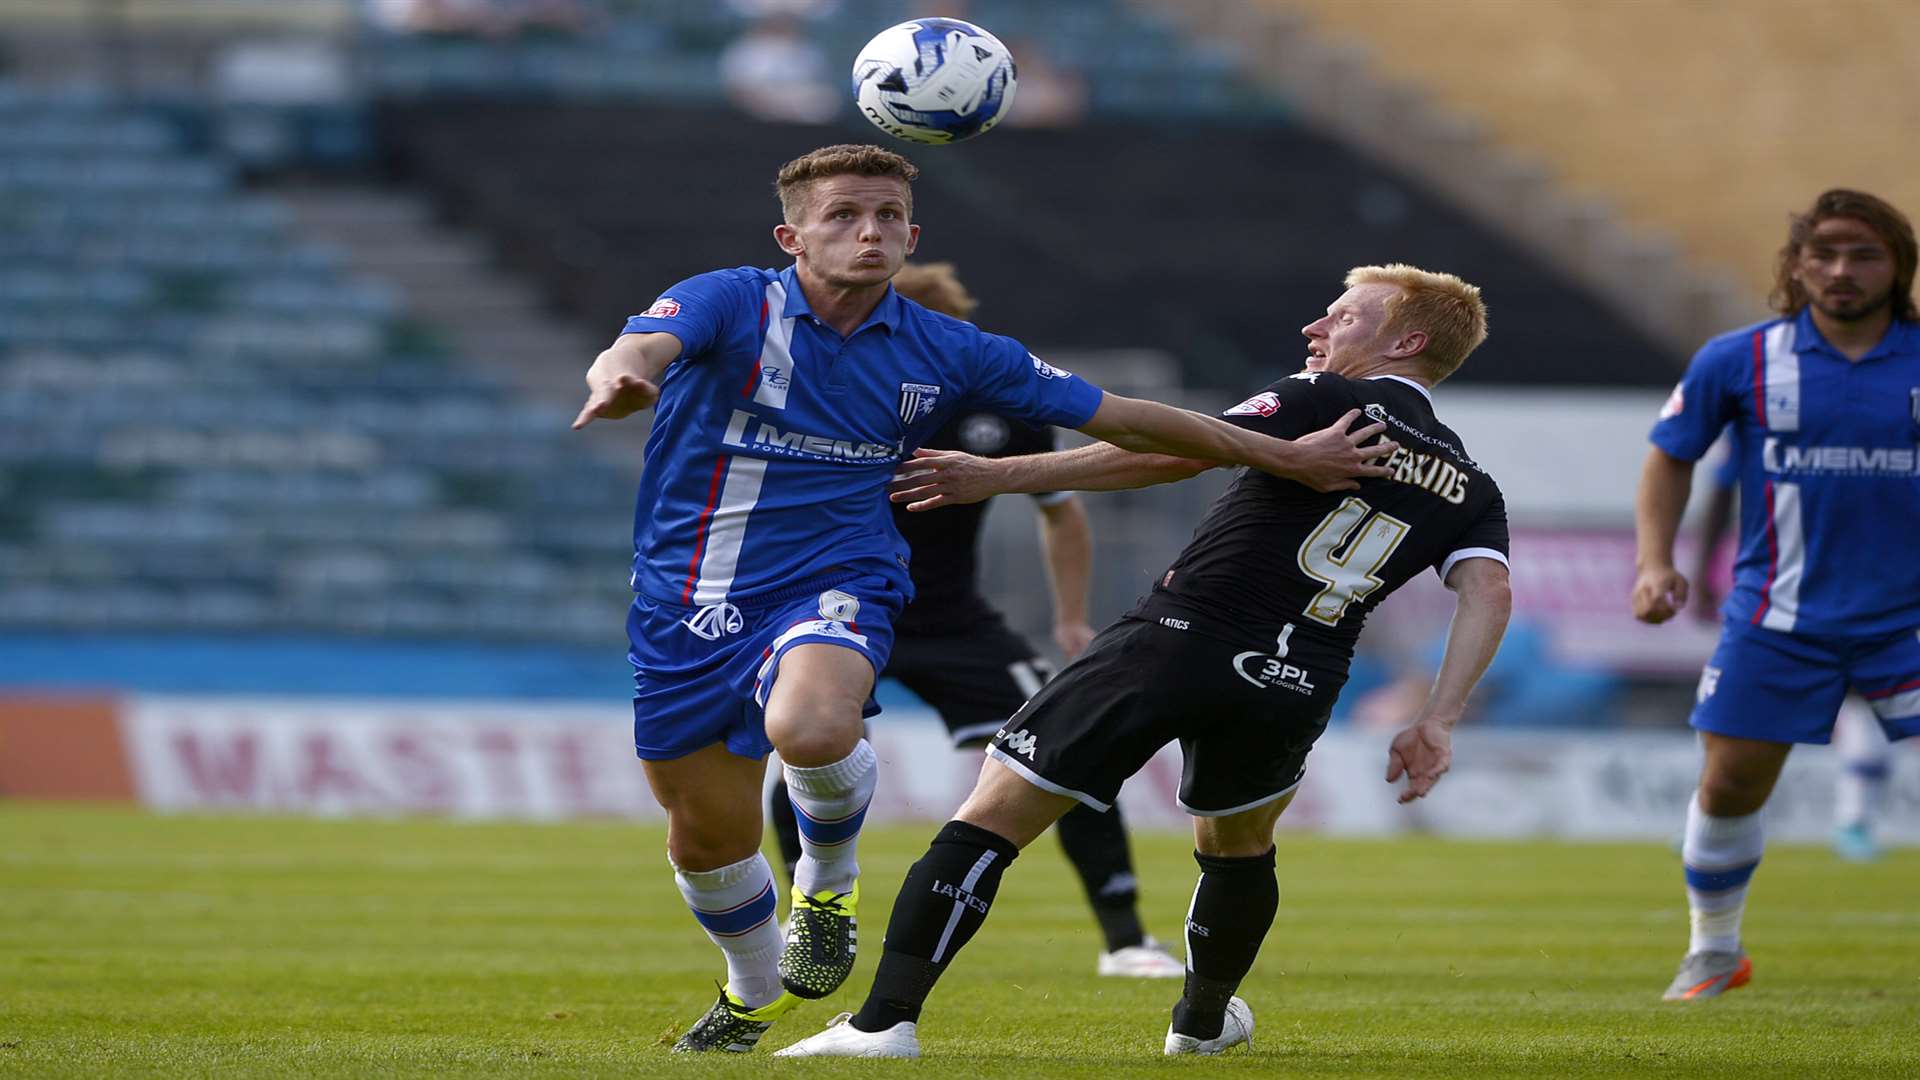 Jordan Houghton playing for the Gills against Wigan Picture: Barry Goodwin